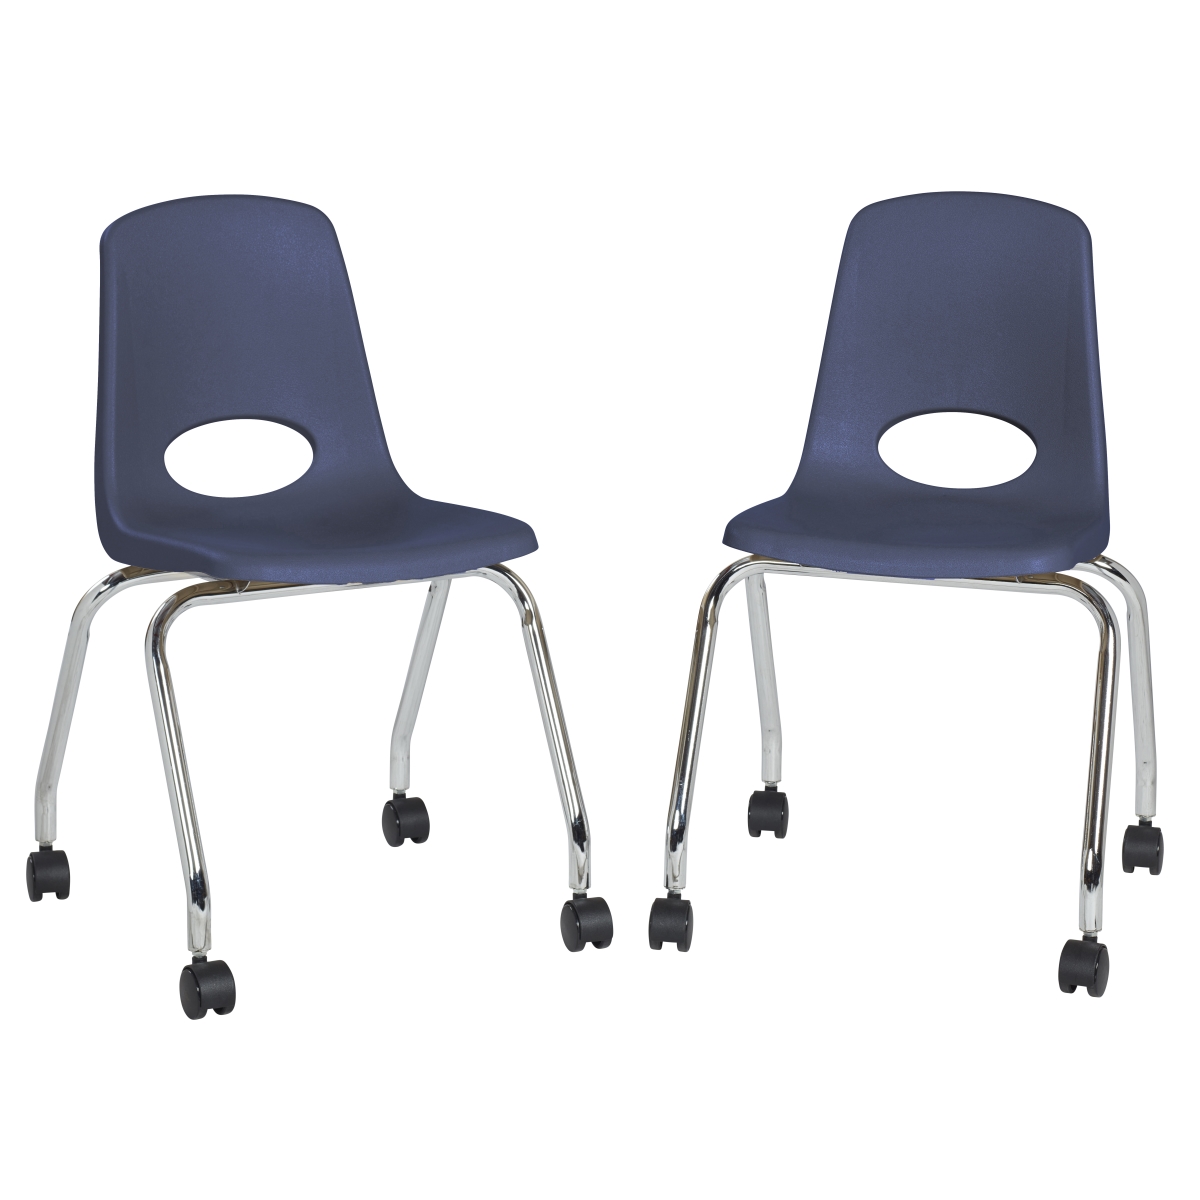 10372-nv 18 In. Mobile Chair With Casters - Navy - Pack Of 2